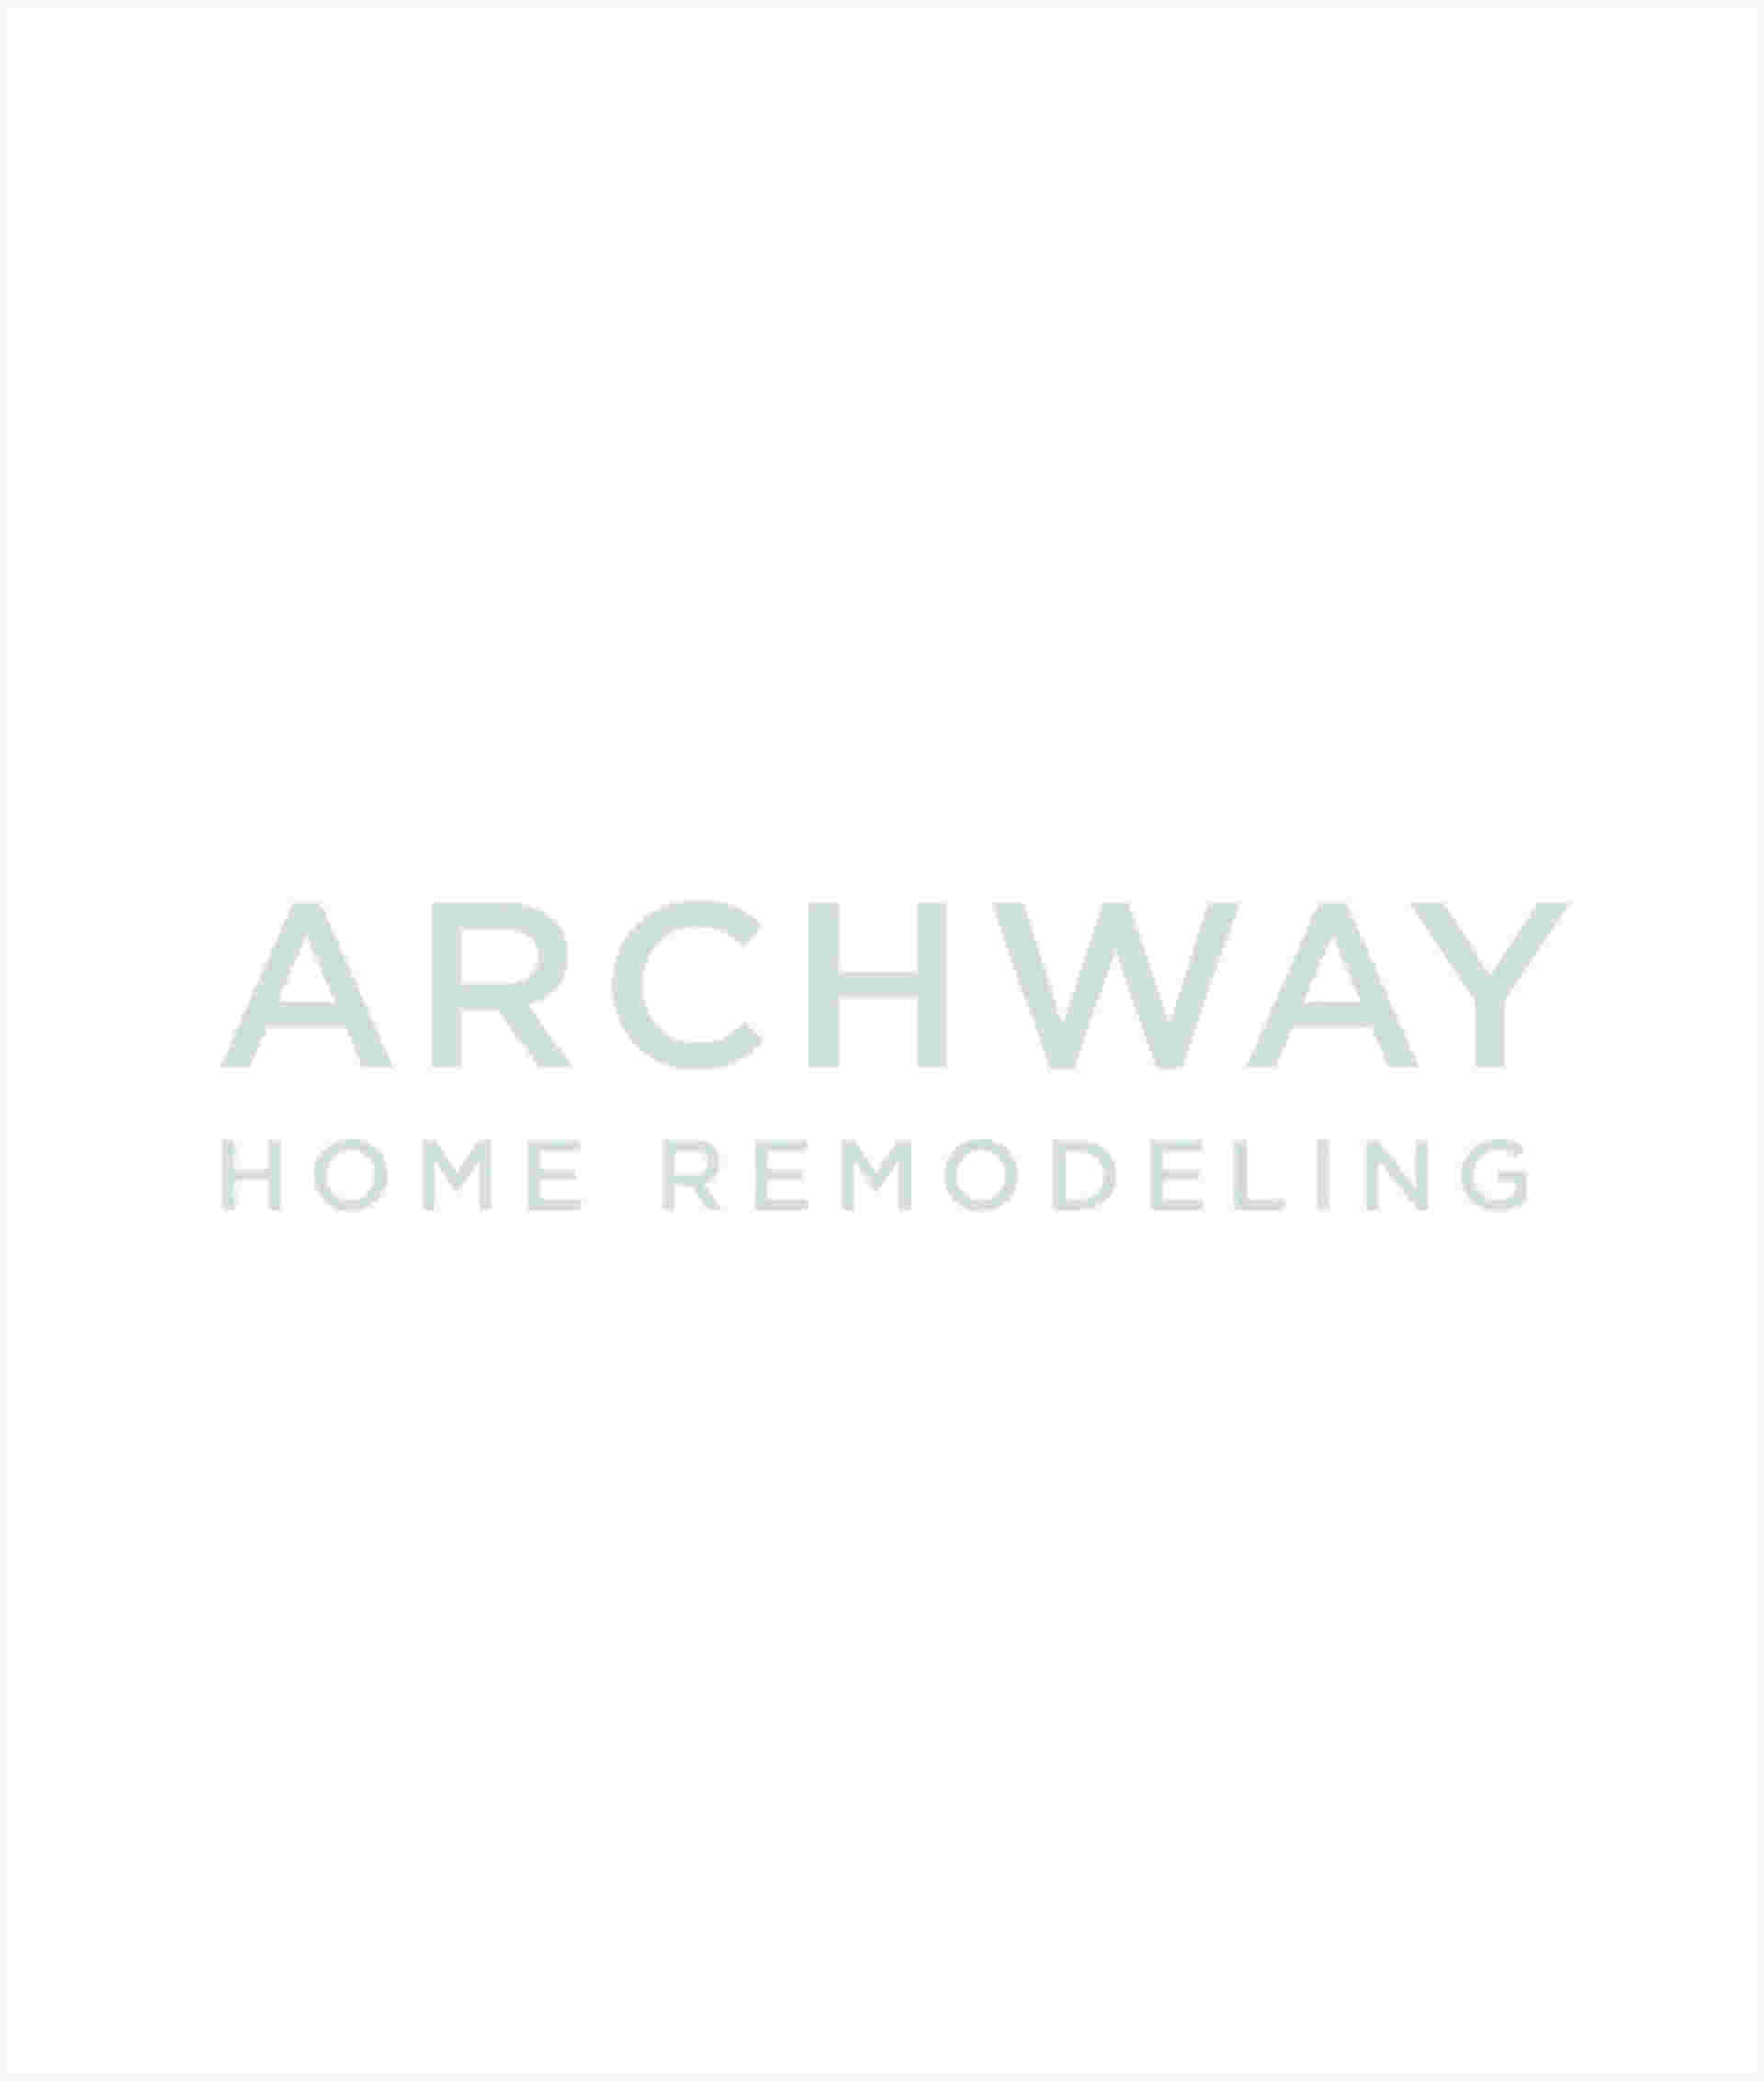 Archway Home Remodeling - 2_4col_WHITE_LOGO_2-1